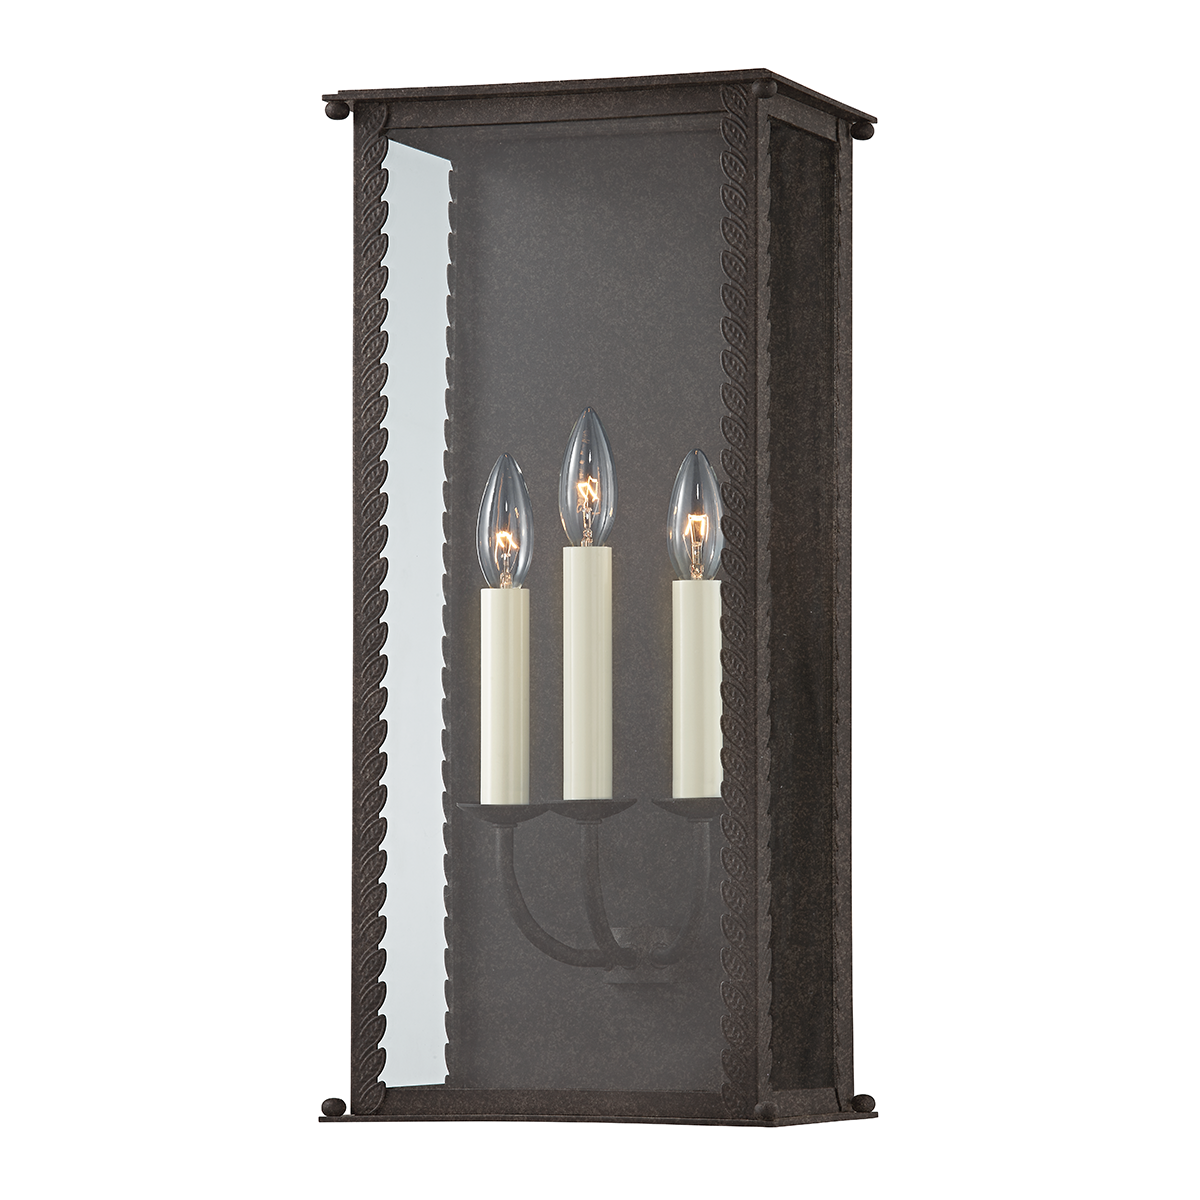 Troy ZUMA 3 LIGHT LARGE EXTERIOR WALL SCONCE B6713 Outdoor l Wall Troy Lighting   